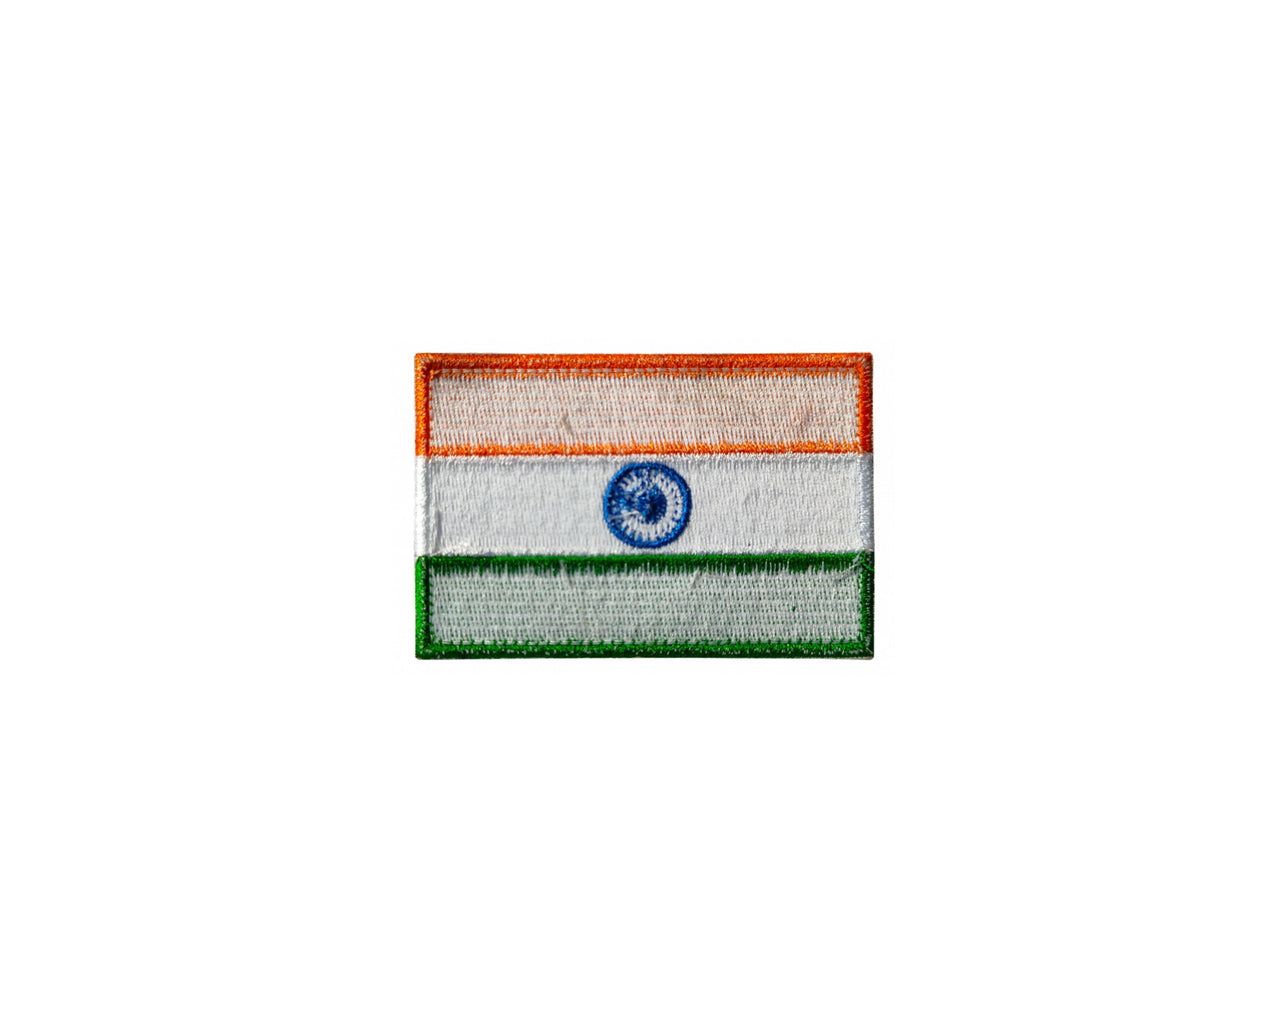 SATYAM ENT Tricolor Tiranga Indian Flag Cloth Badge/Coat  Pin/Brooch/Honourable Prize/Badge for Republic Day/Independence Day, School  Functions (Pack of 12 pcs.) : Amazon.in: Toys & Games